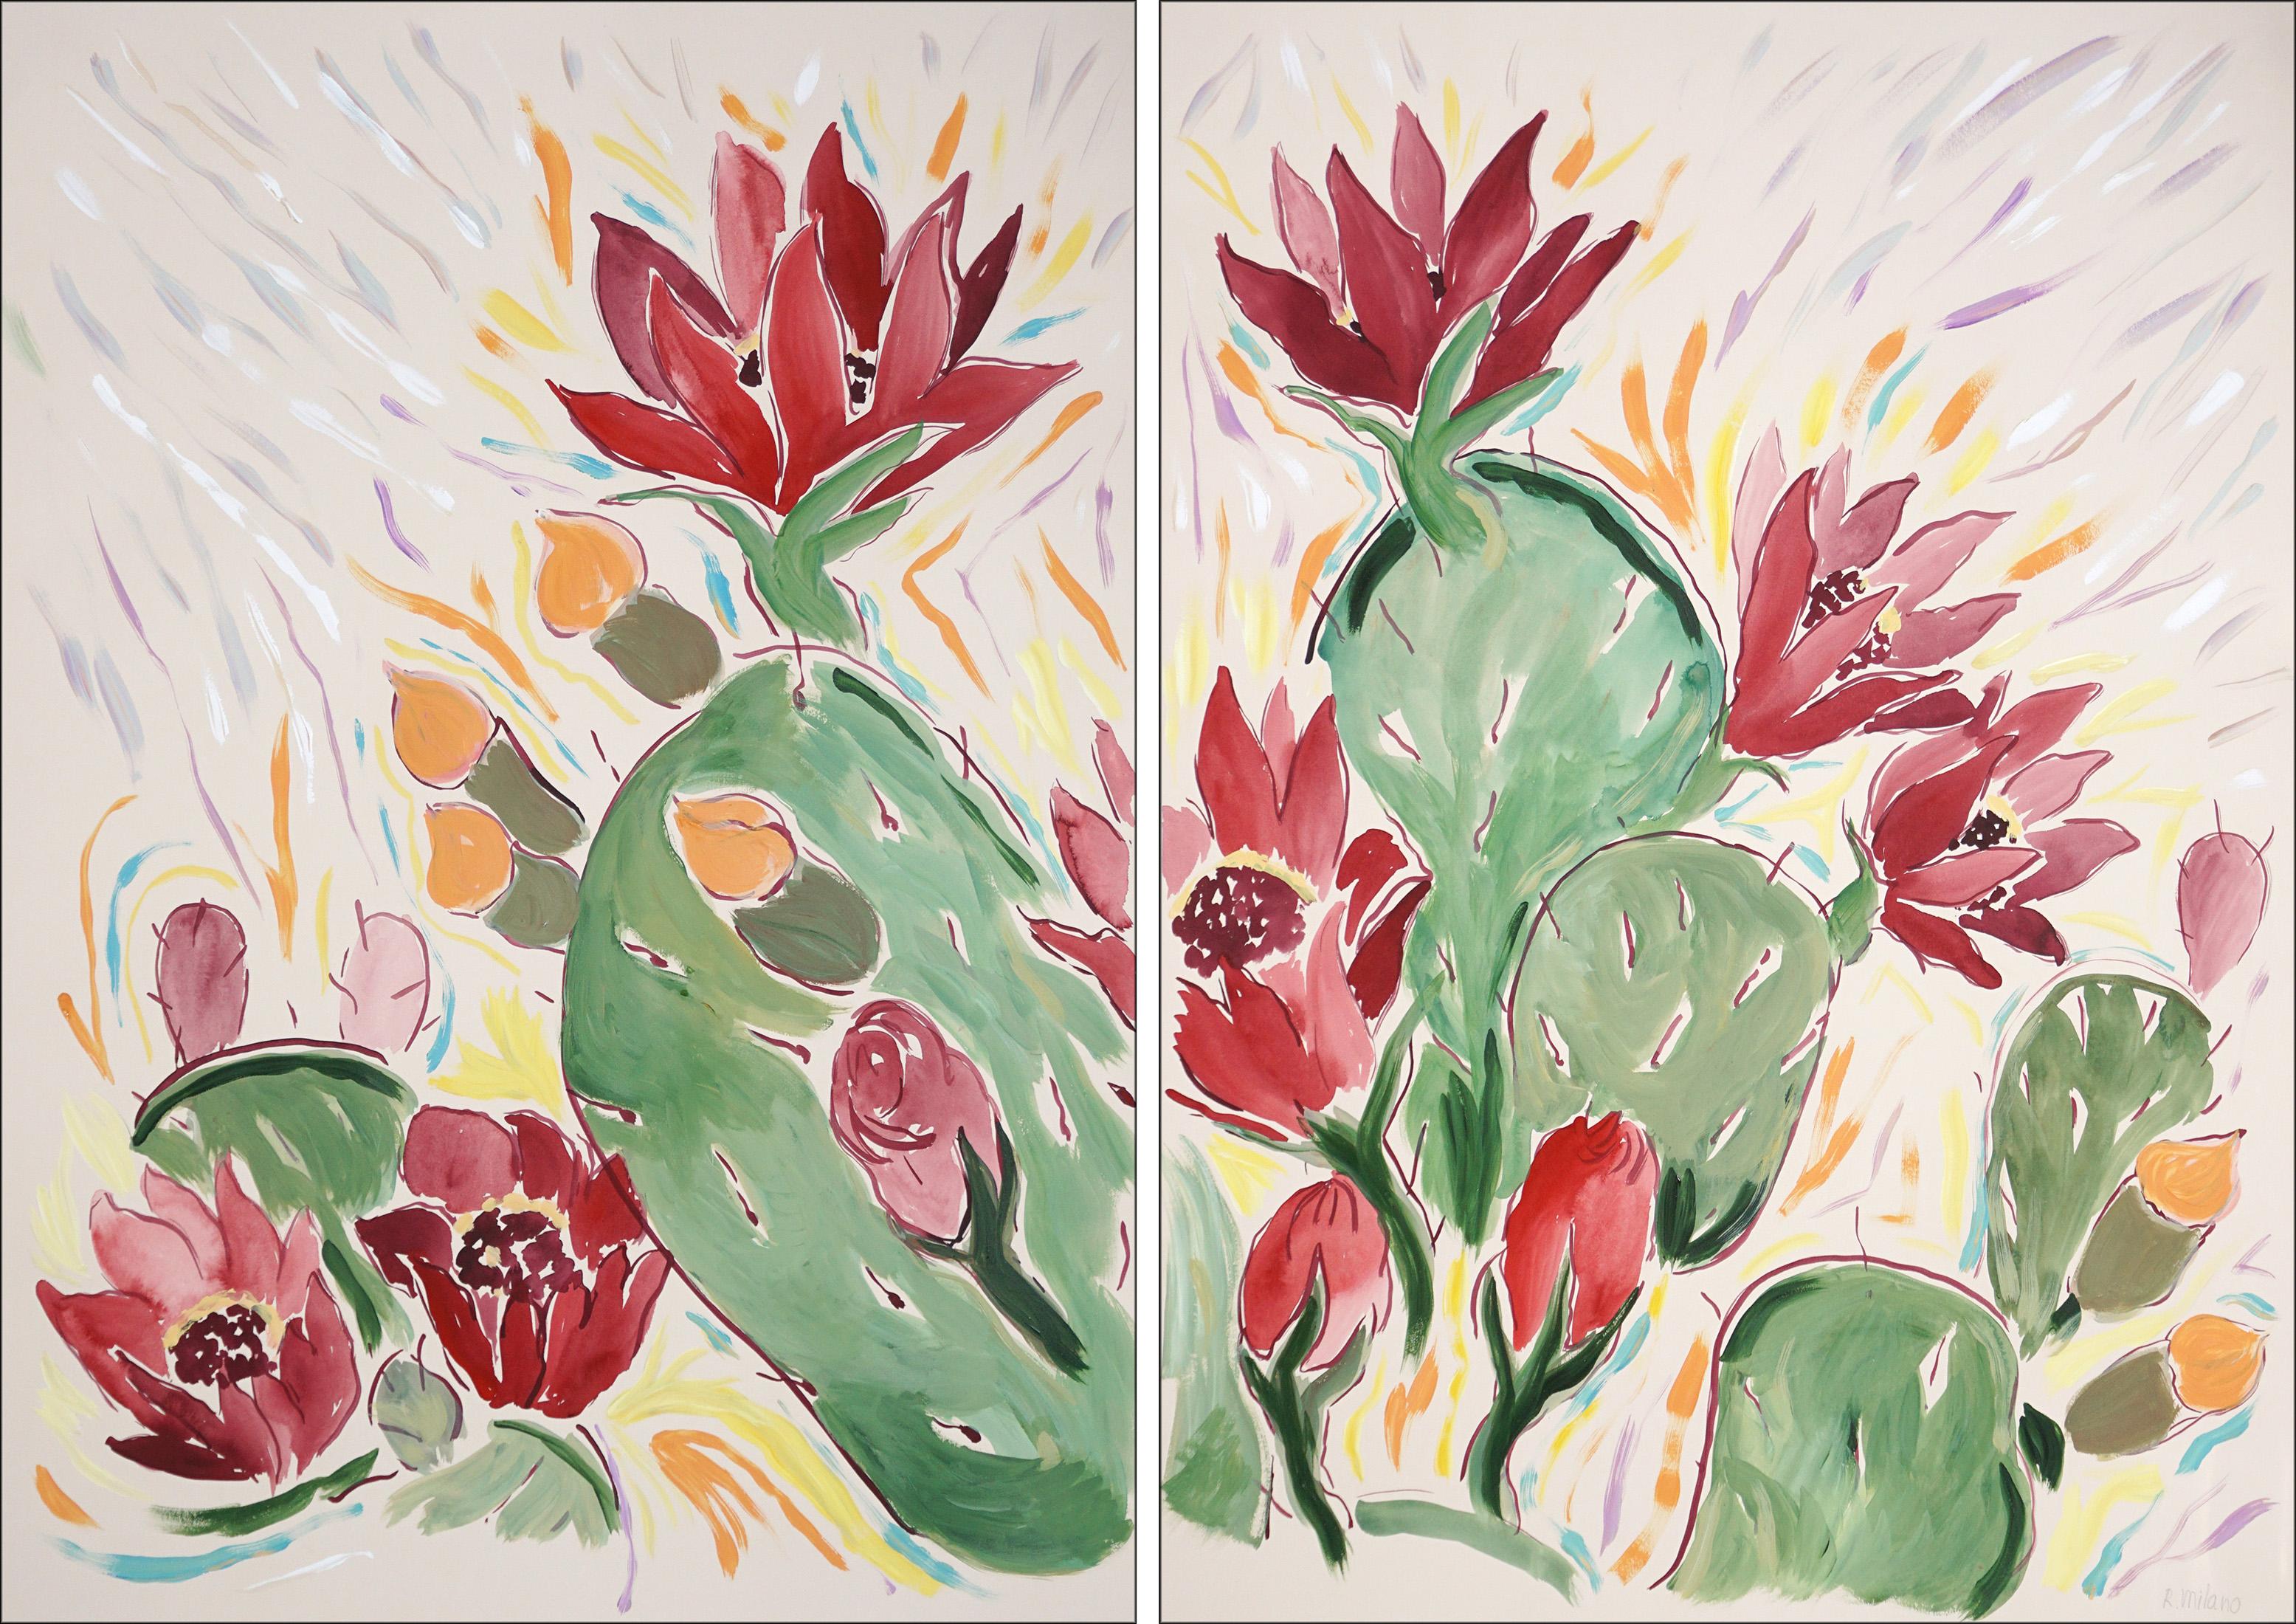 Romina Milano Landscape Painting - Blooming Flowers in Red, Green Wild Cactus Diptych, Illustration Style, Desert 